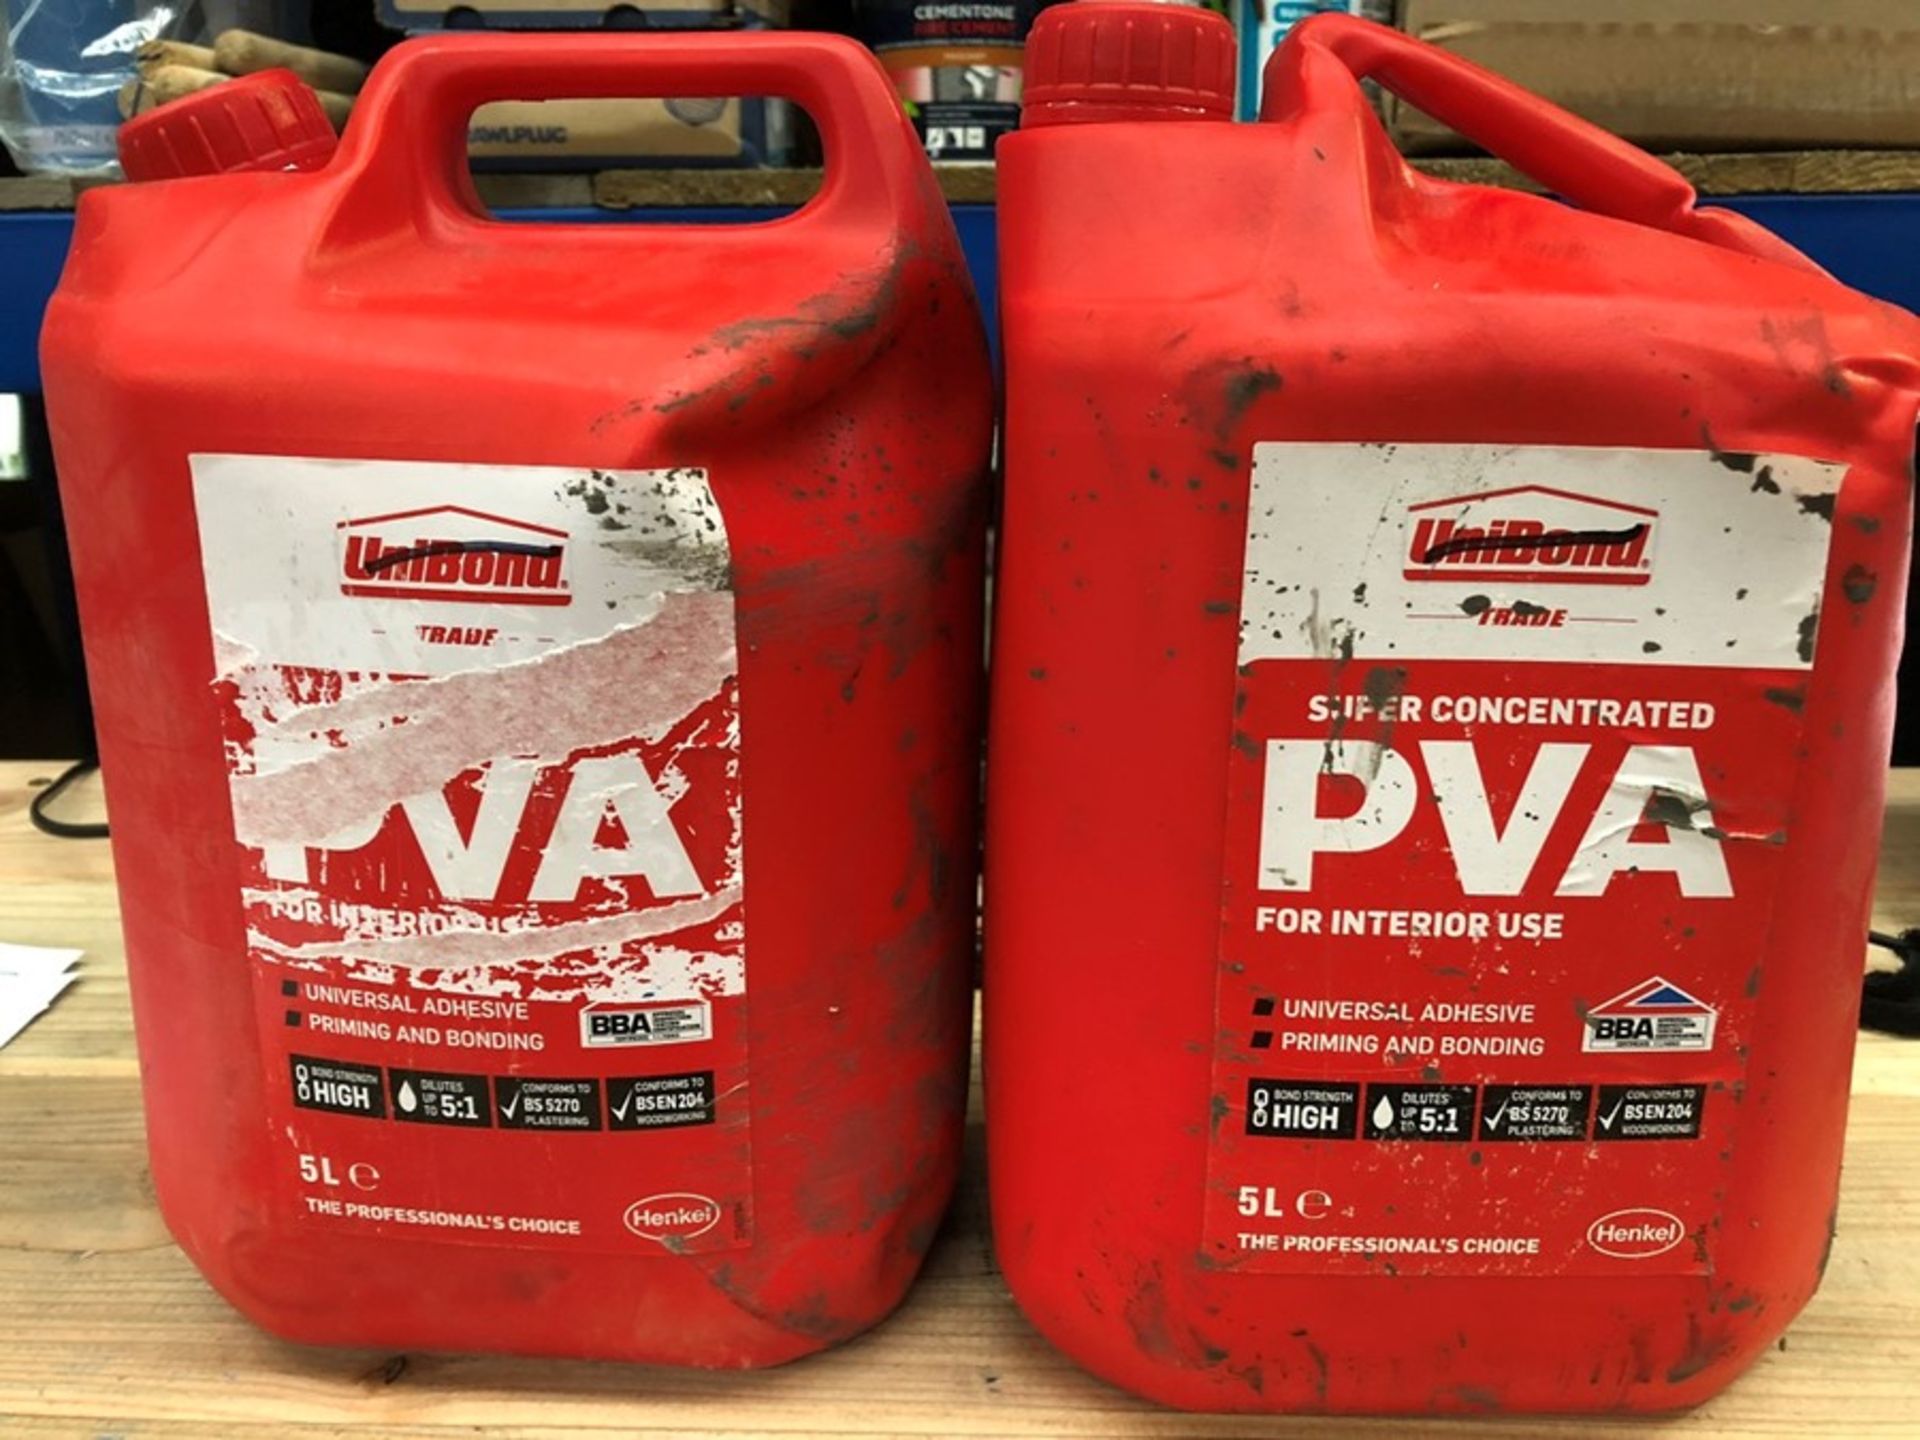 1 LOT TO CONTAIN 2 BOTTLES OF UNIBOND PVA SUPER CONCENTRATED / 5 LITRES PER BOTTLE (PUBLIC VIEWING